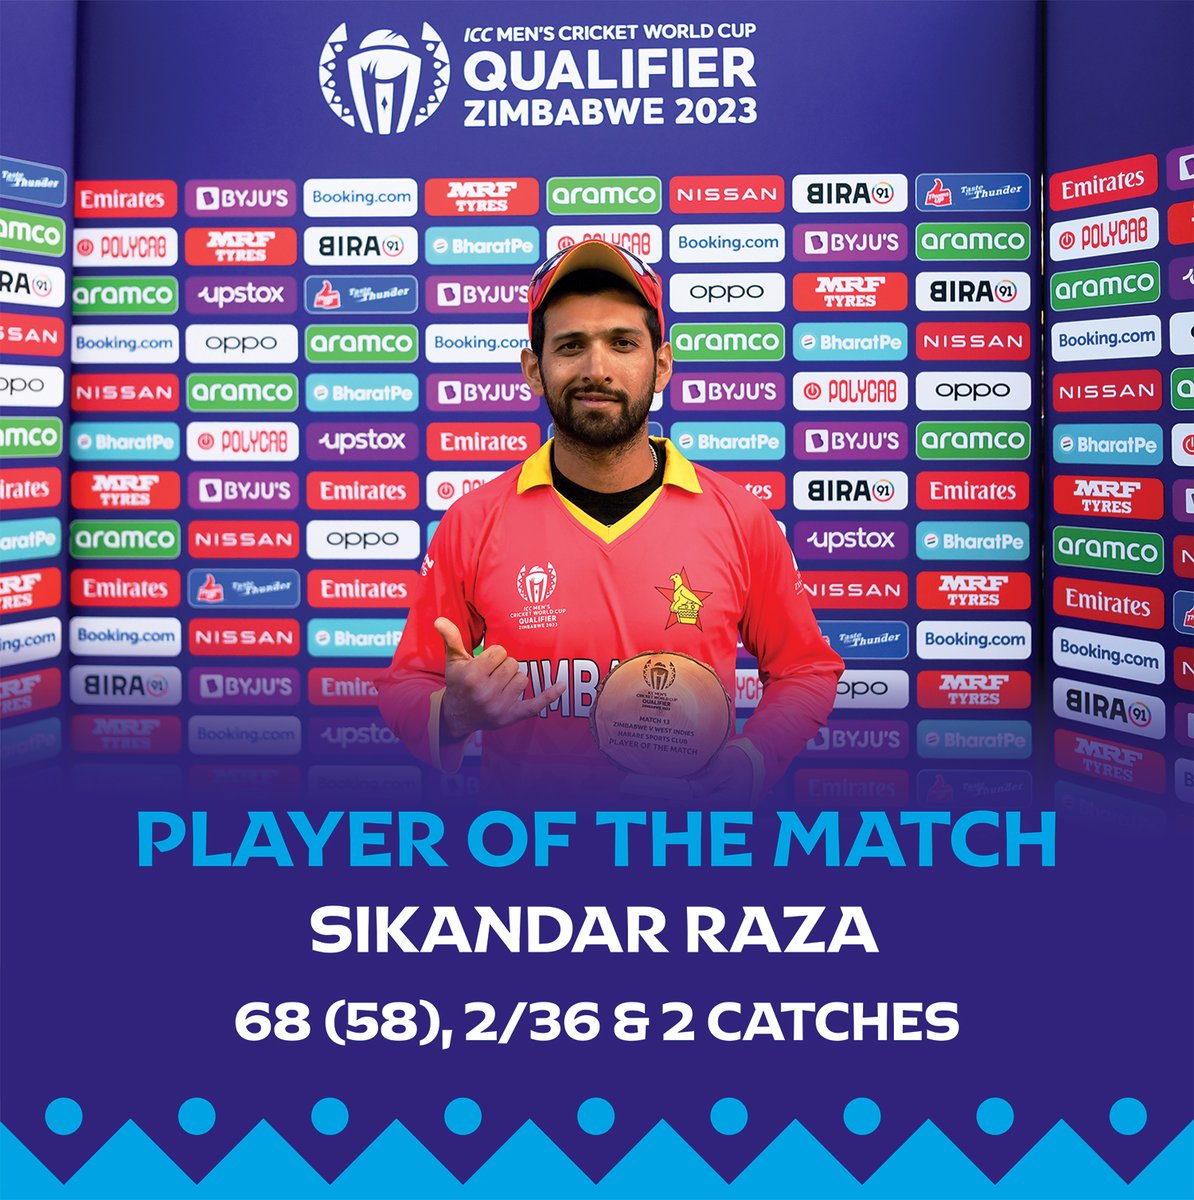 .@aramco Player of the Match, for his 68 from 58 balls, and two catches, is @SRazaB24! 👏

#ZIMvWI | #CWC23